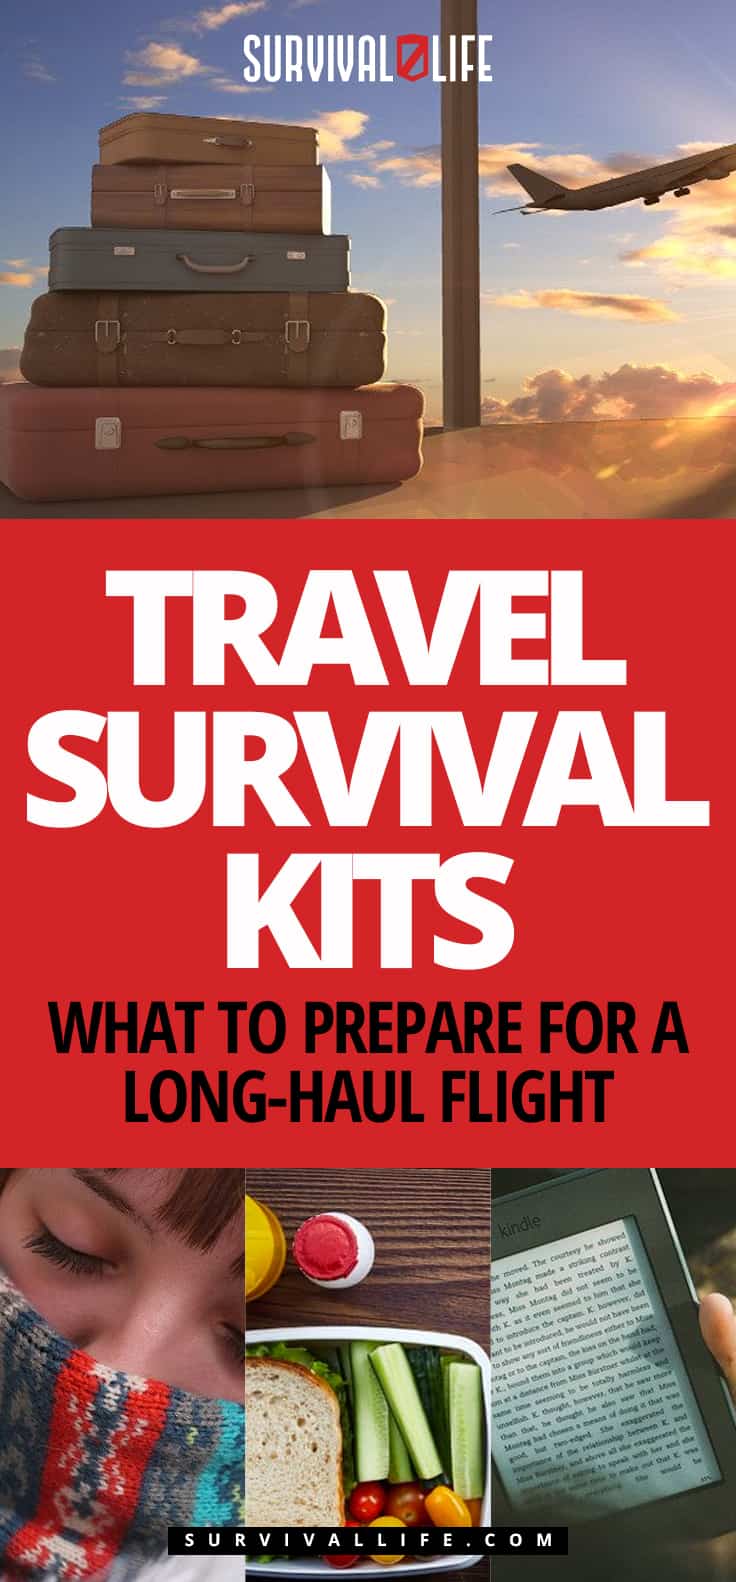 Travel Survival Kits | What To Prepare For A Long-Haul Flight